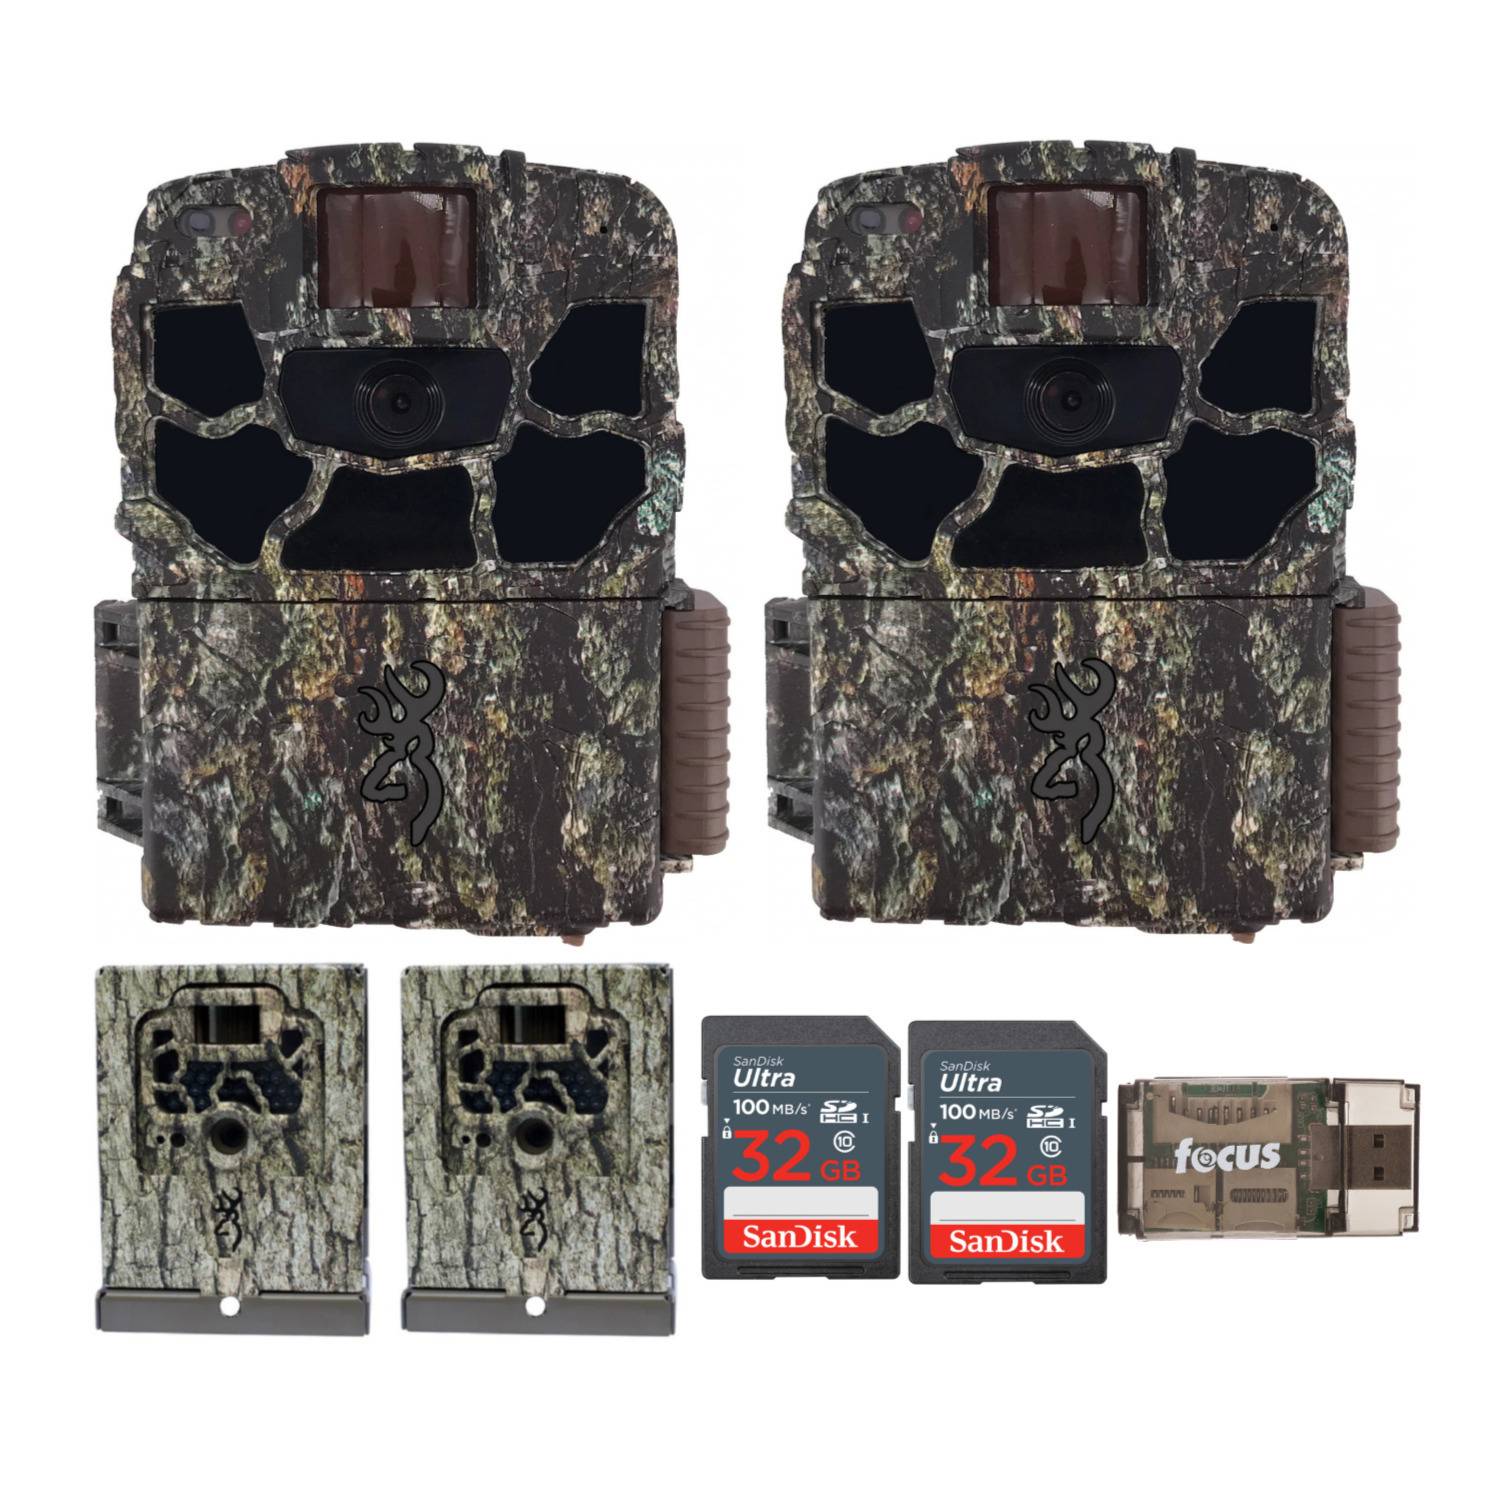 Browning Dark Ops Full HD Trail Camera with Security Box, 32GB SD Card, and Card Reader (2-Pack)